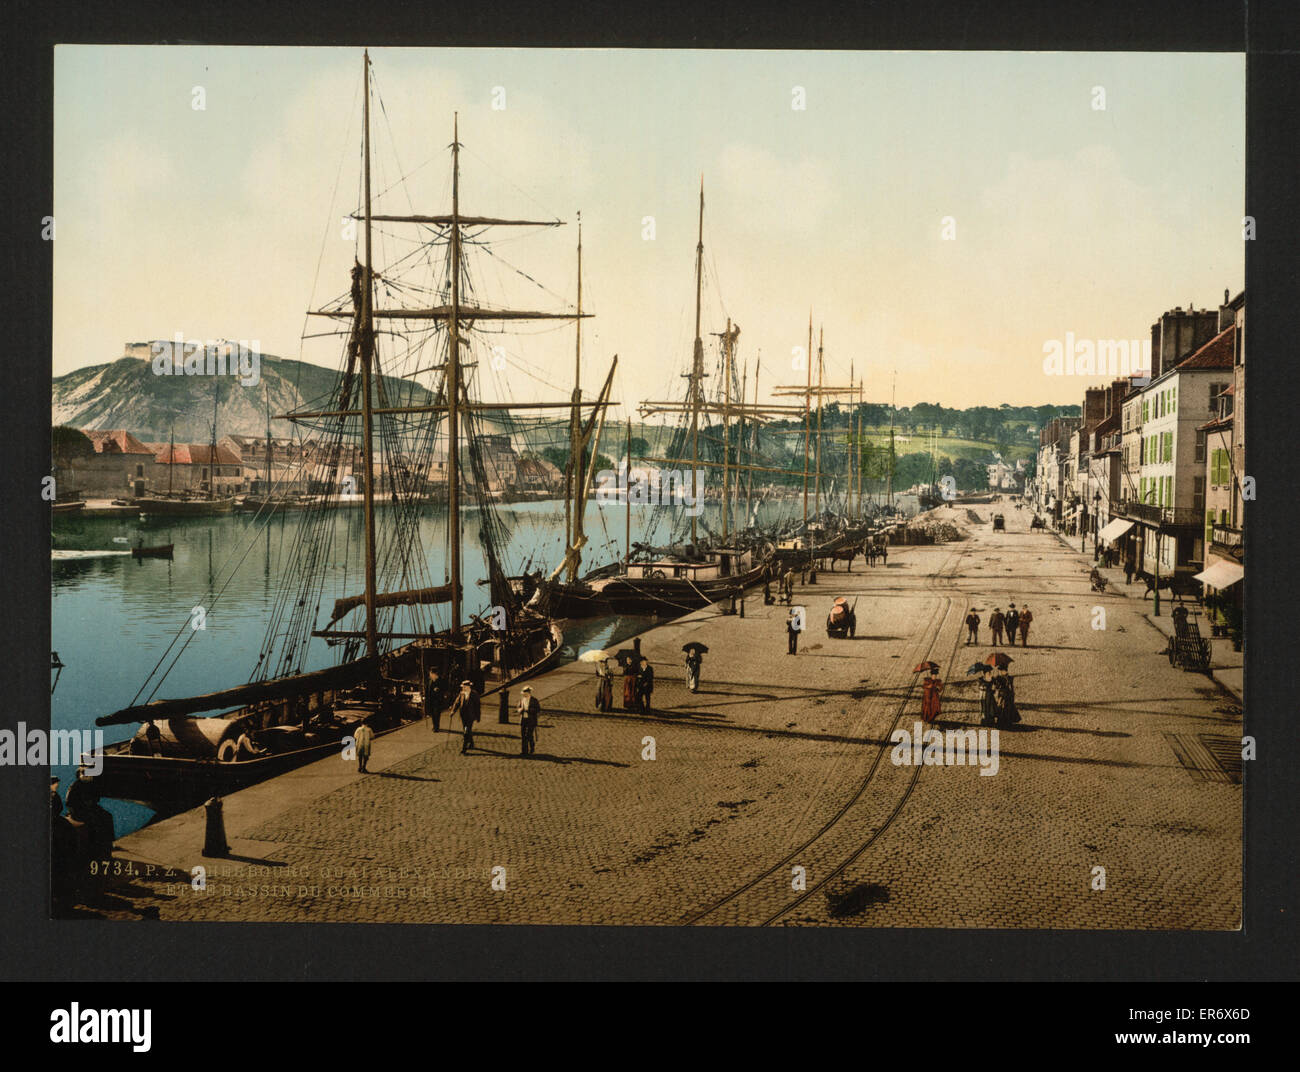 Quay Alex. III and commercial docks, Cherbourg, France Stock Photo